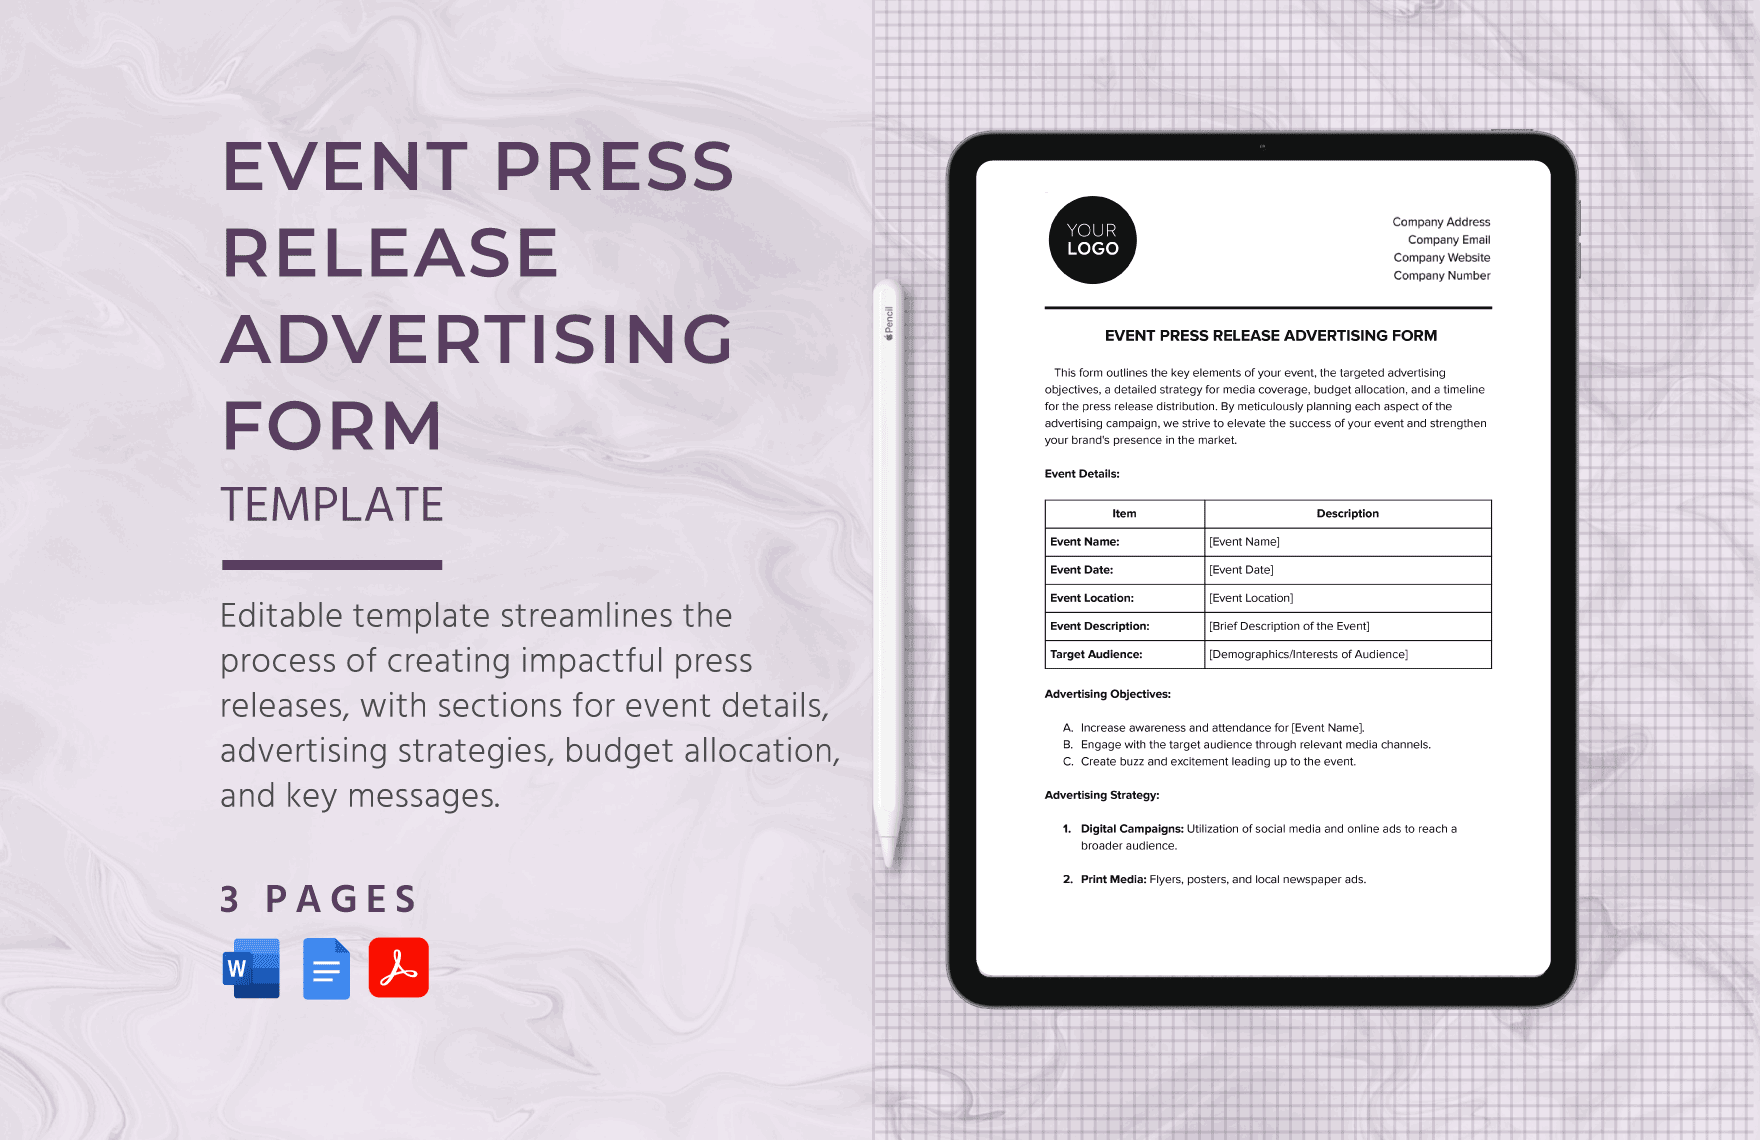 Event Press Release Advertising Form Template in Word, Google Docs, PDF